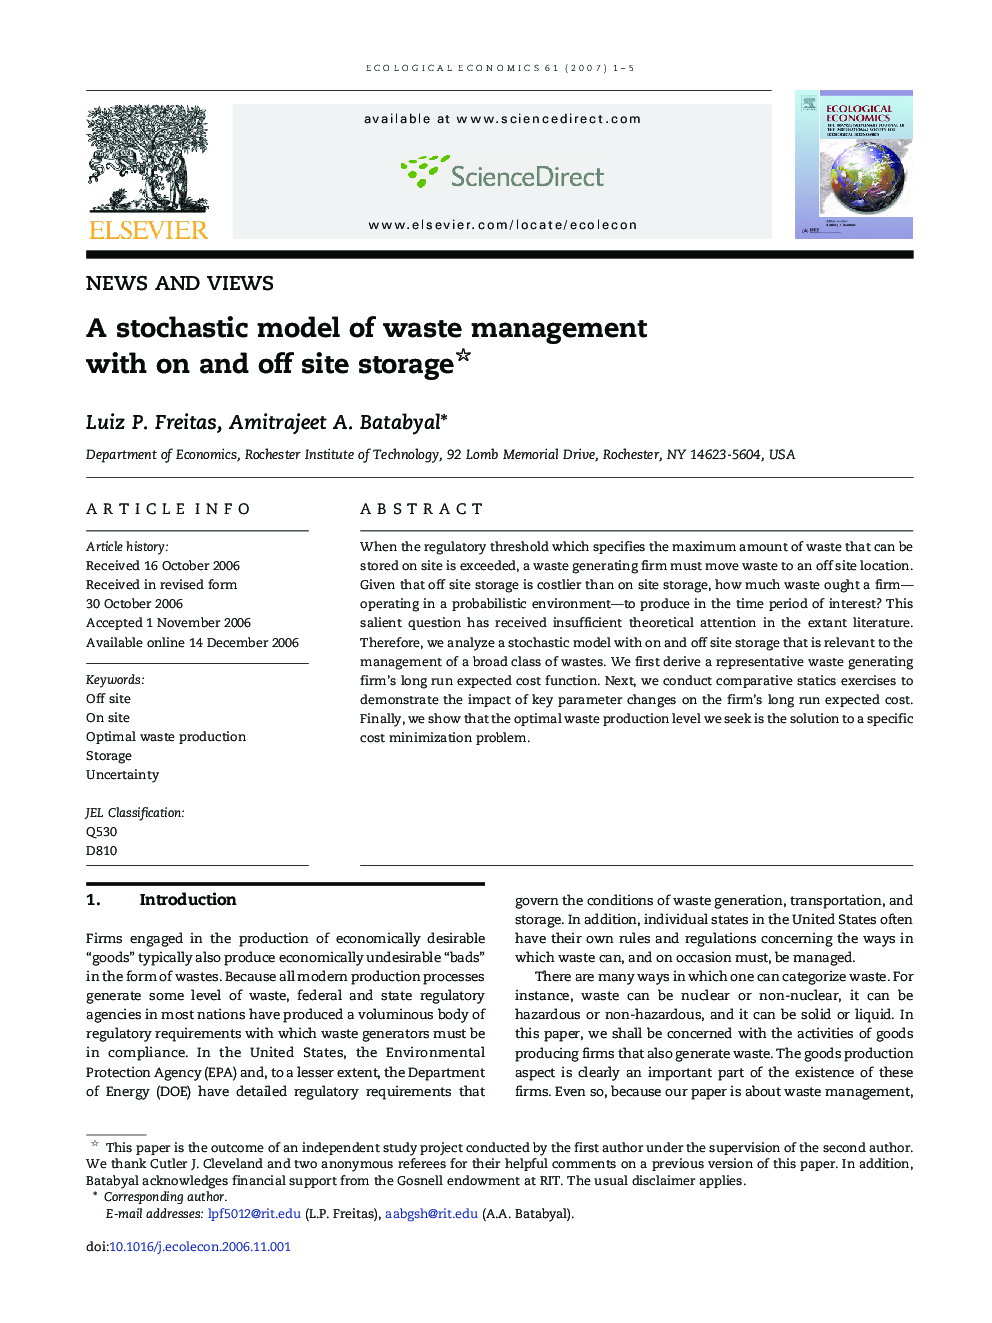 A stochastic model of waste management with on and off site storage